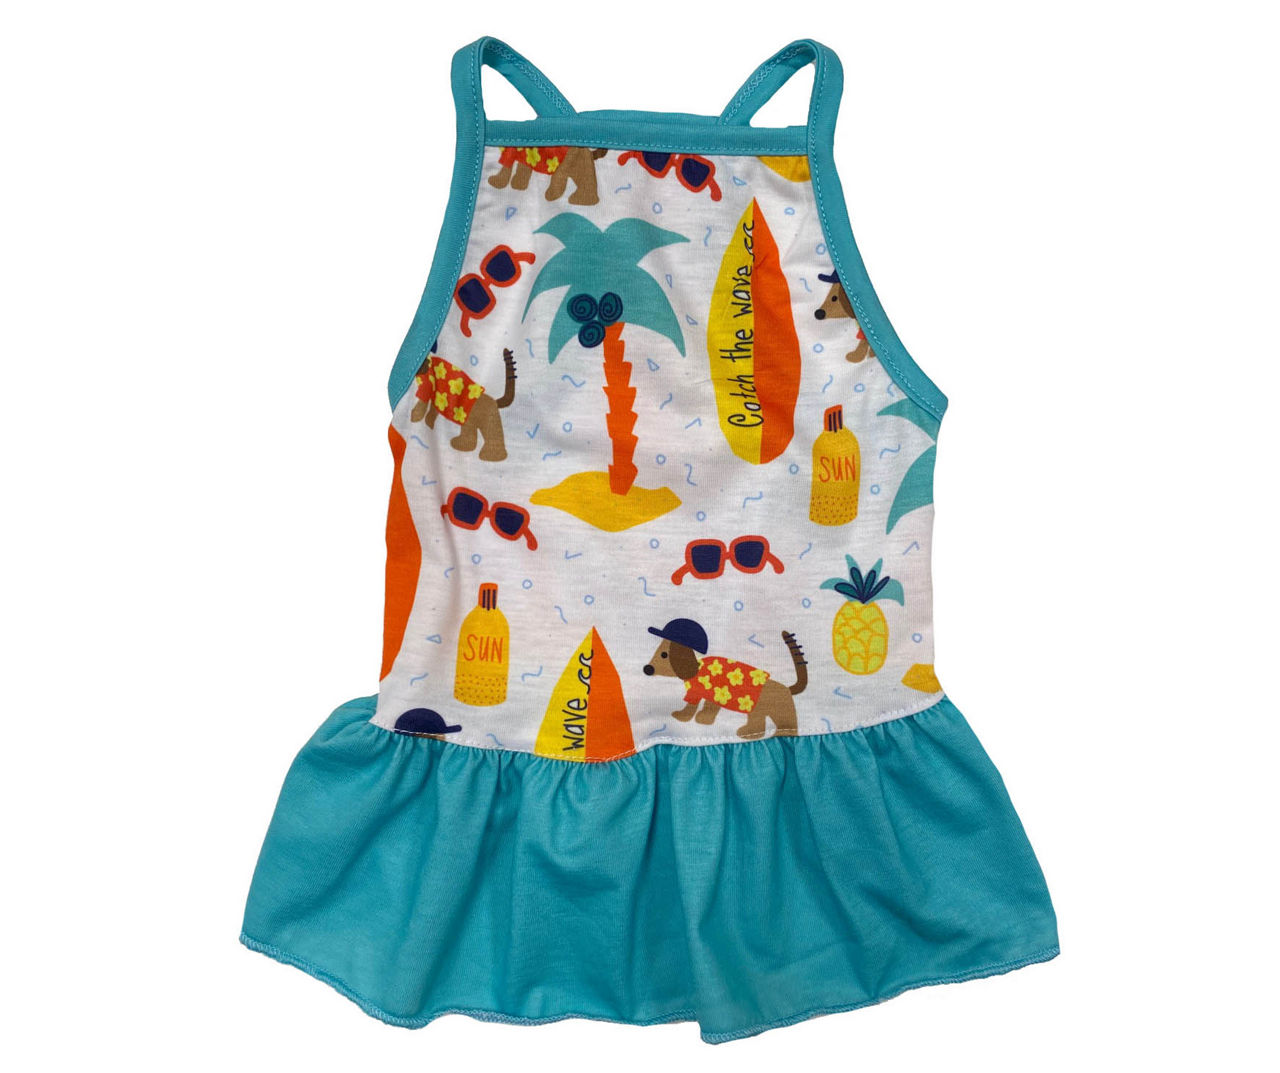 Dog's Small "Catch the Wave" Dress